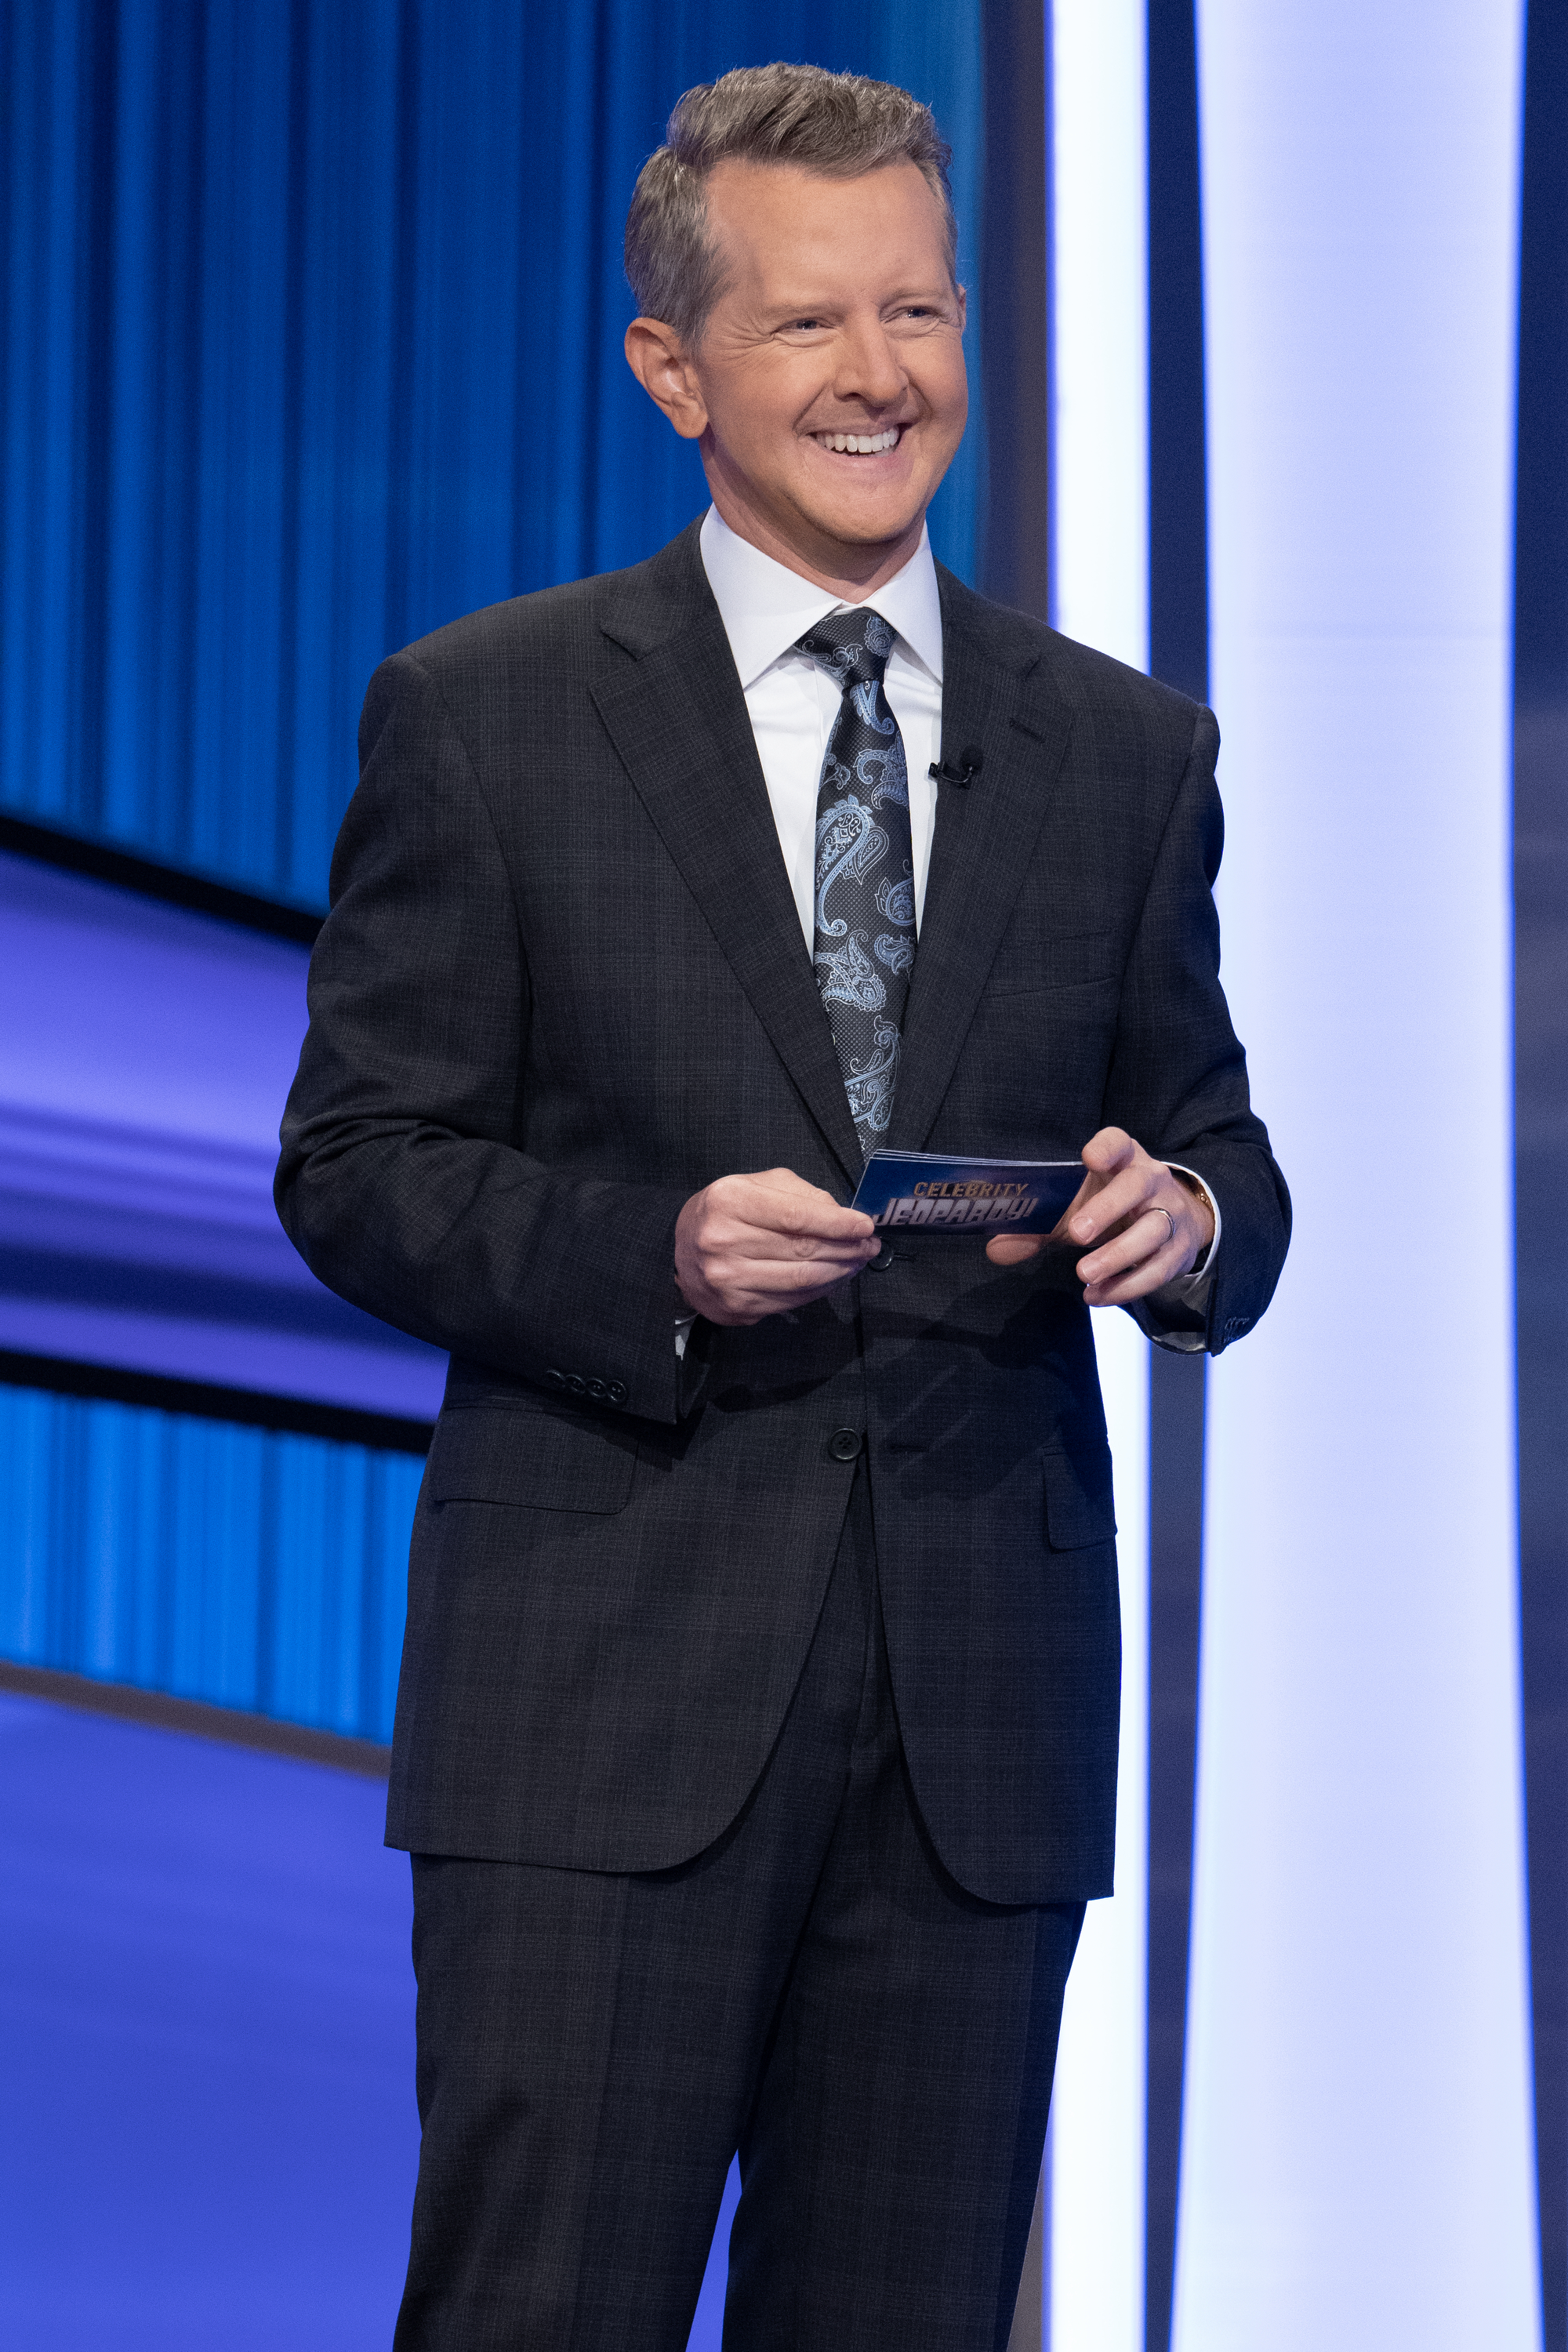 Ken Jennings is now the solo host of Jeopardy! after the game show said they made the decision to have Mayim leave